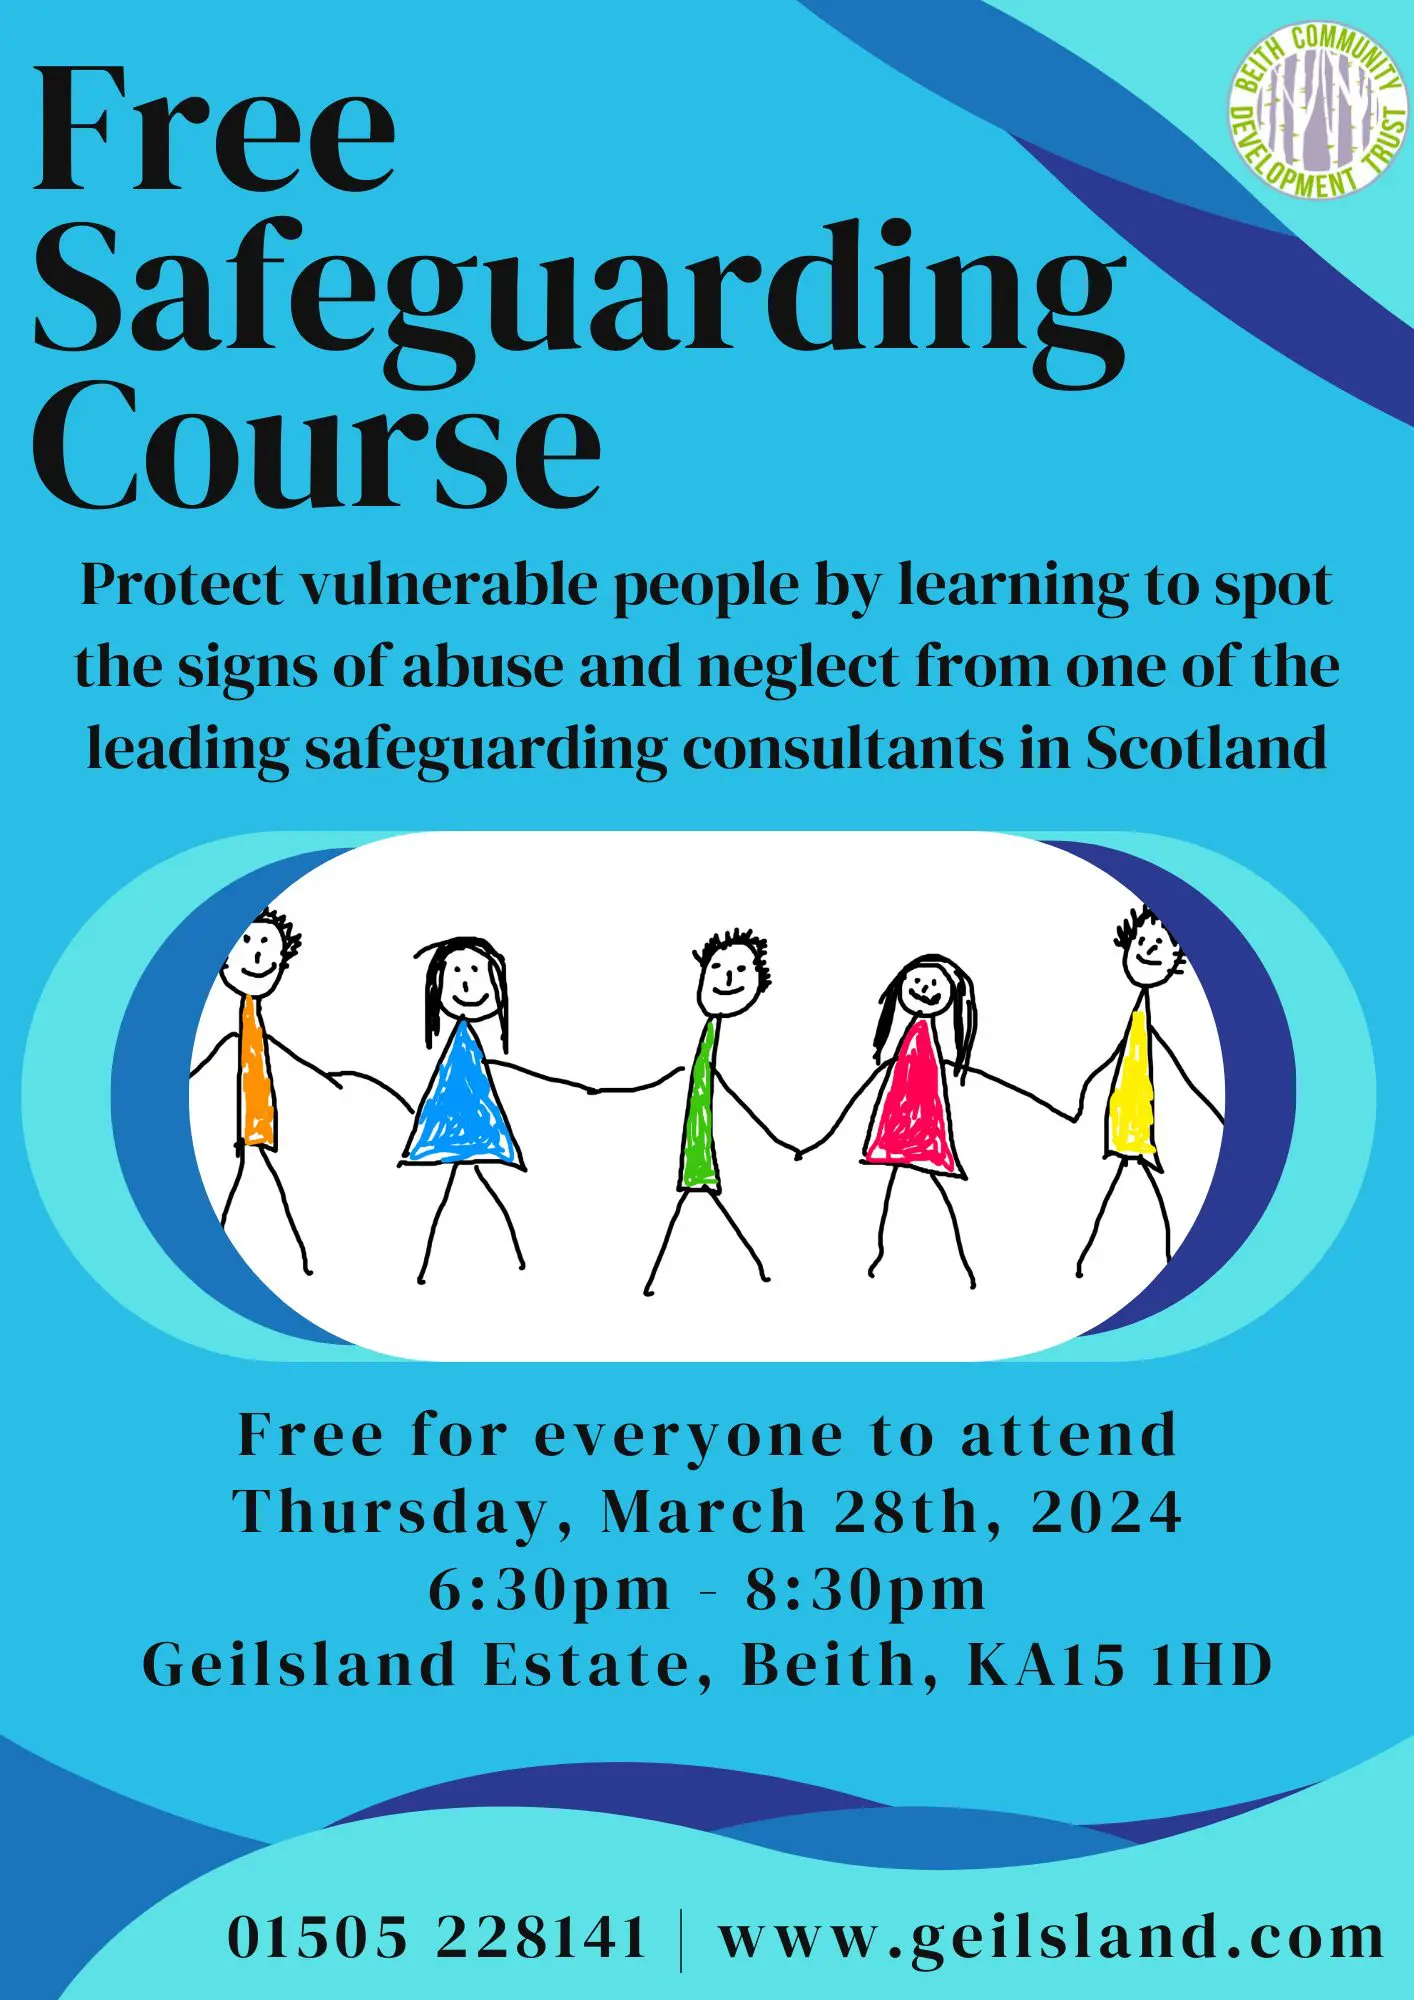 Empower your community with our free safeguarding course this March!